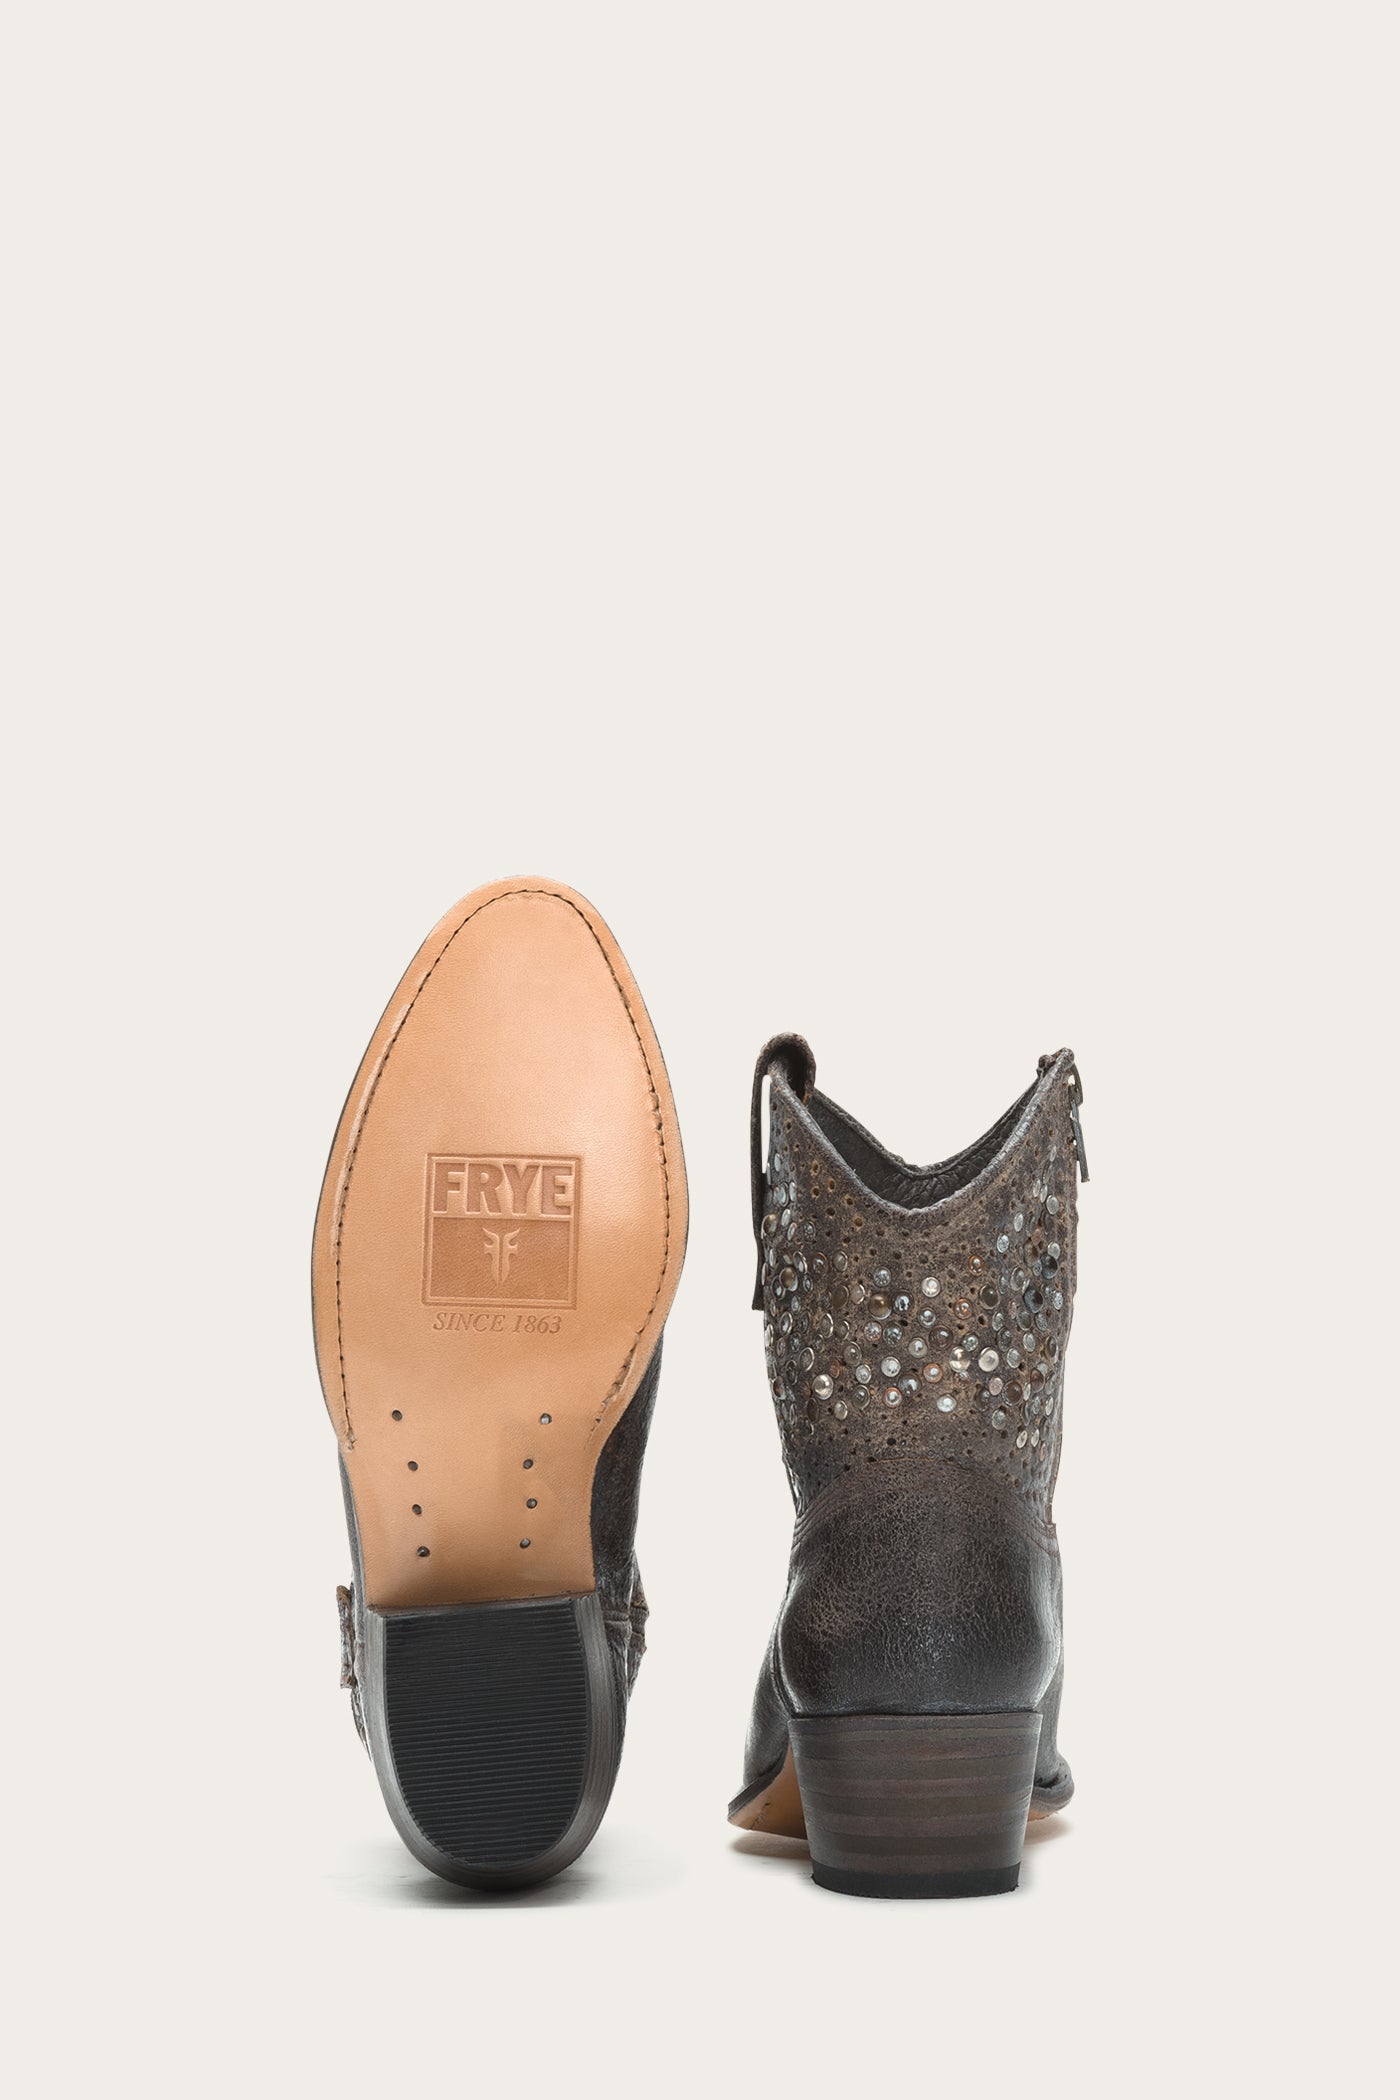 studded frye boots